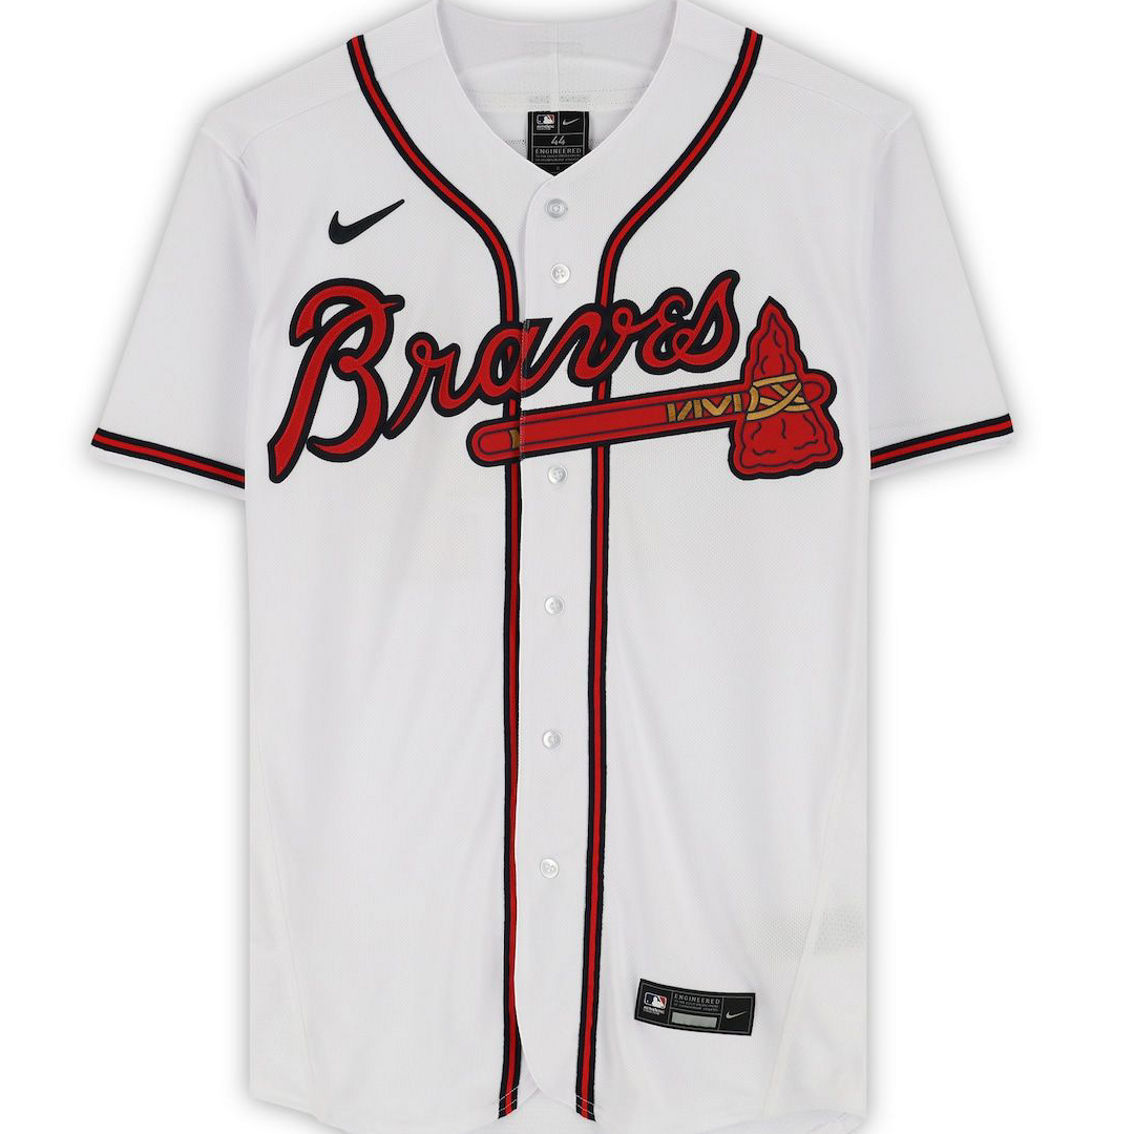 Fanatics Authentic Max Fried Atlanta Braves Autographed White Authentic Jersey - Image 4 of 4